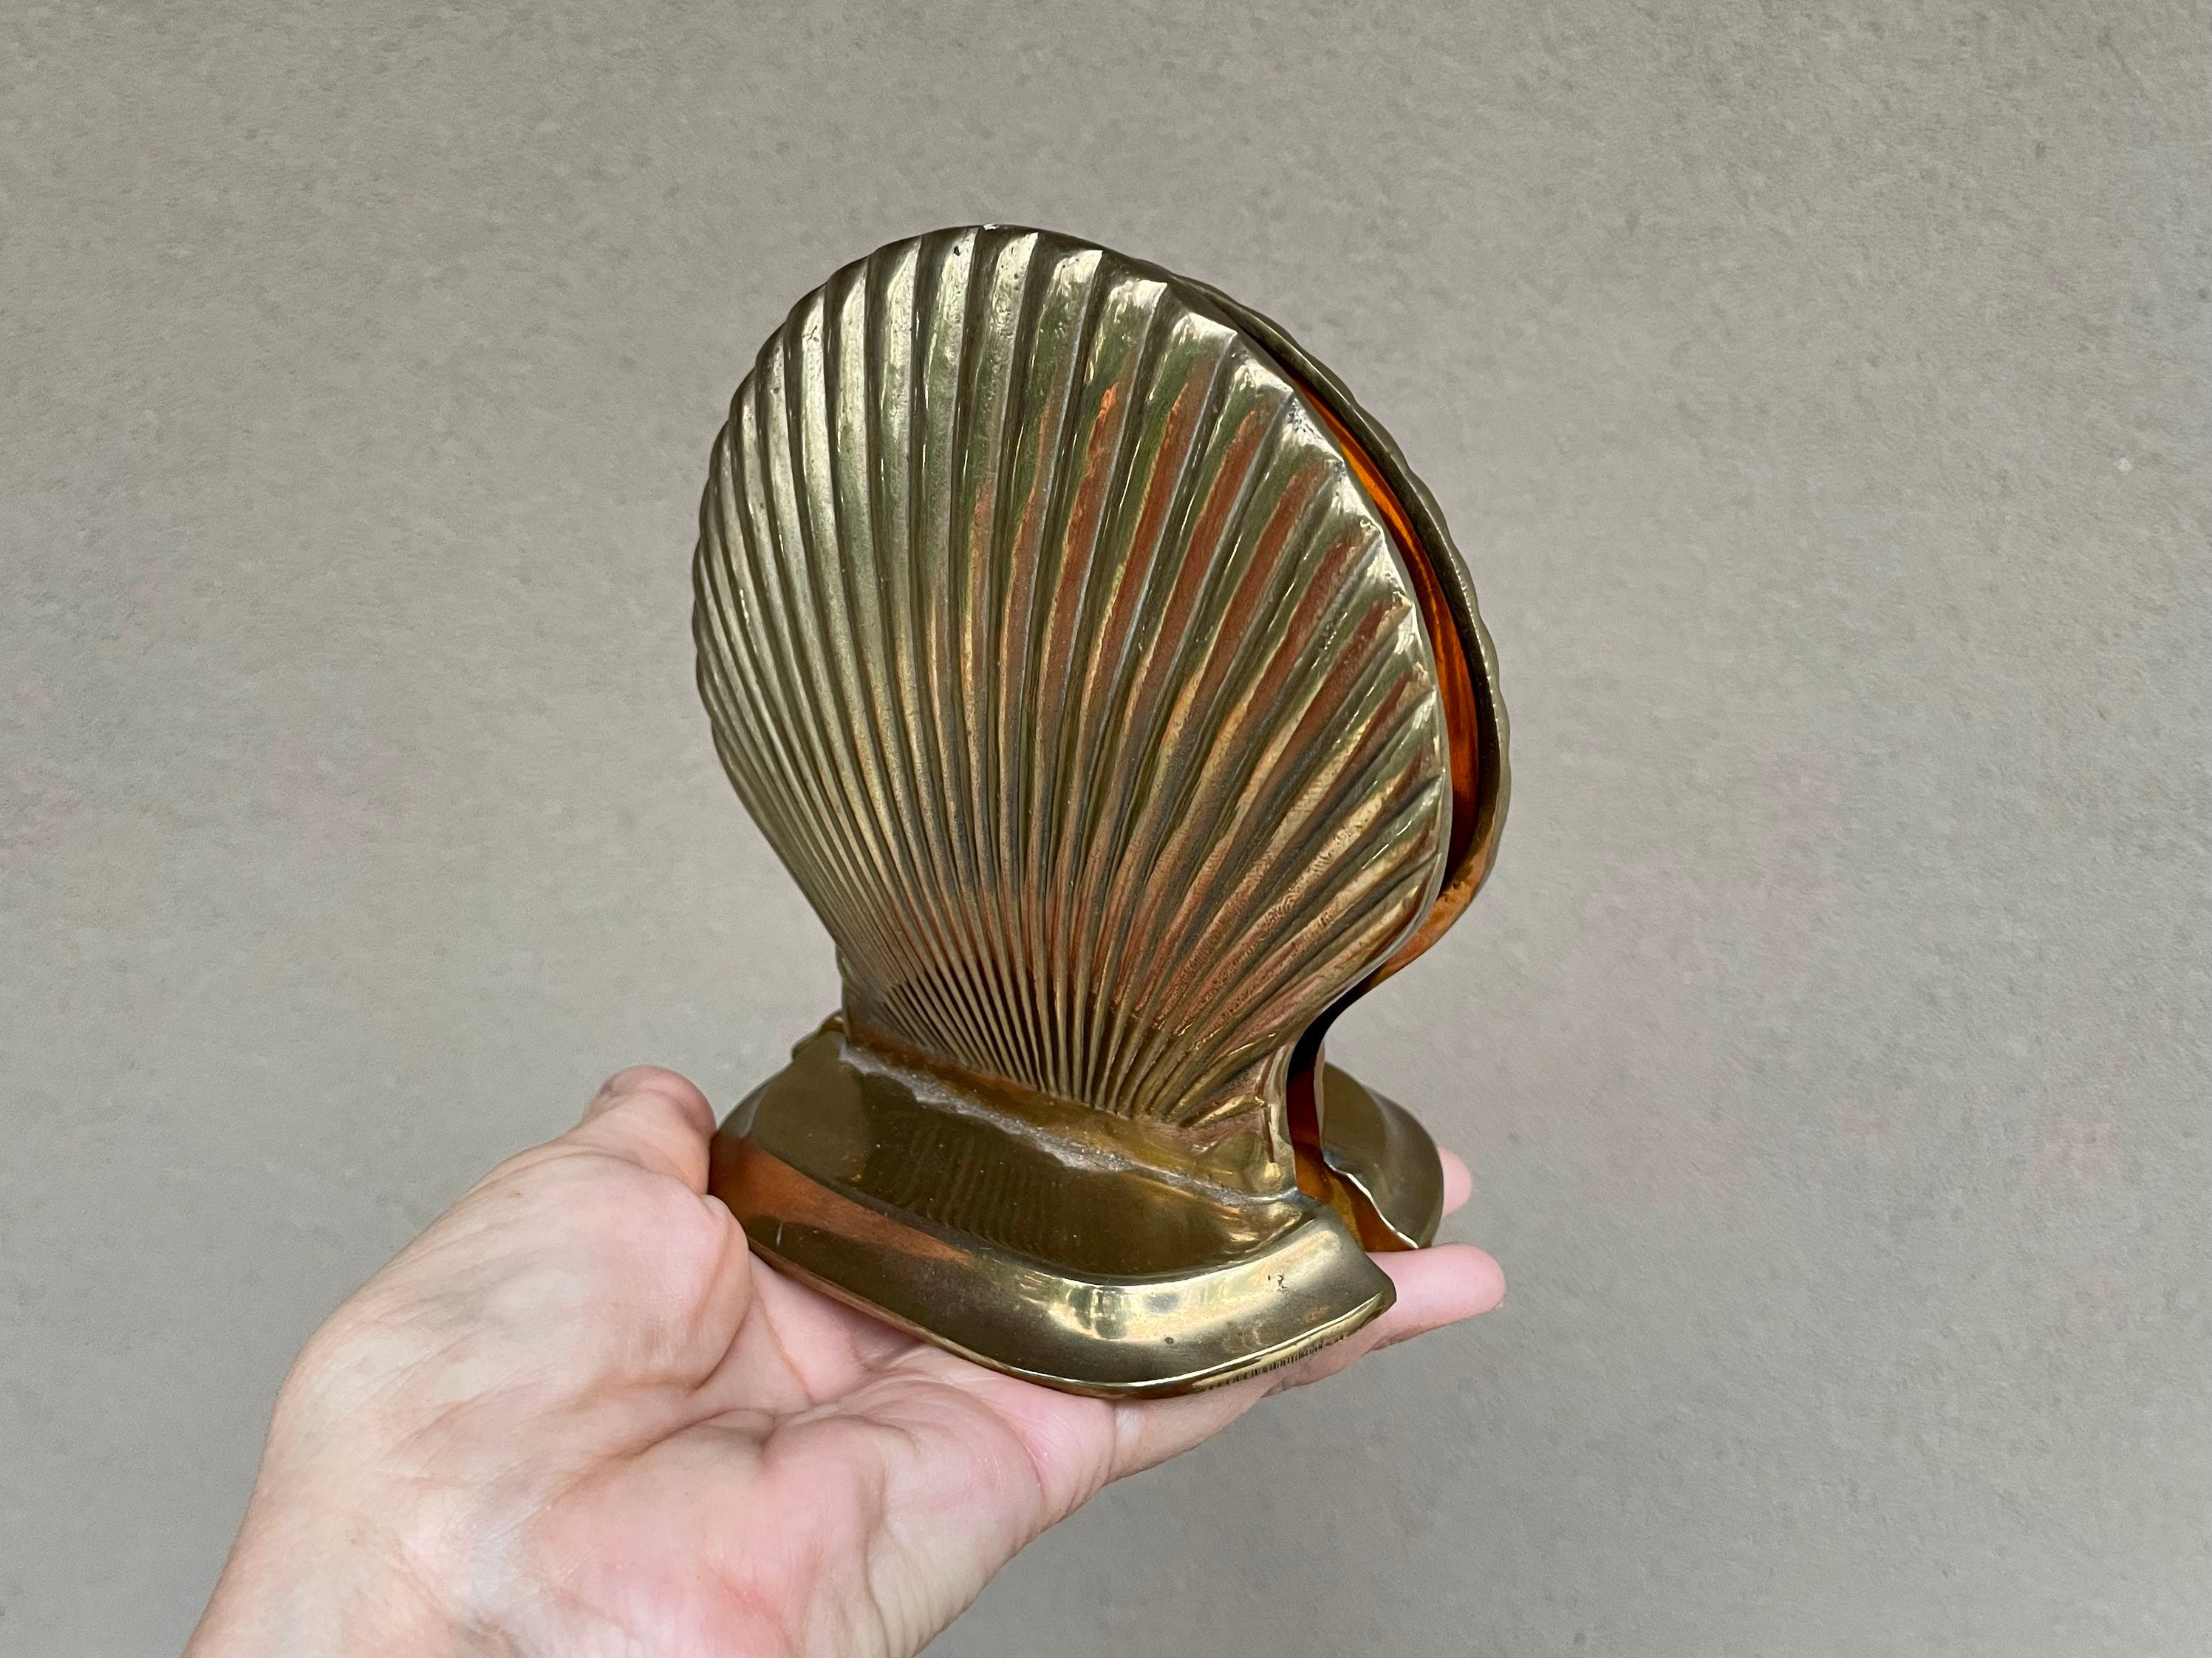 Set of Vintage Brass Clamshell Bookends, Medium-Small Scalloped